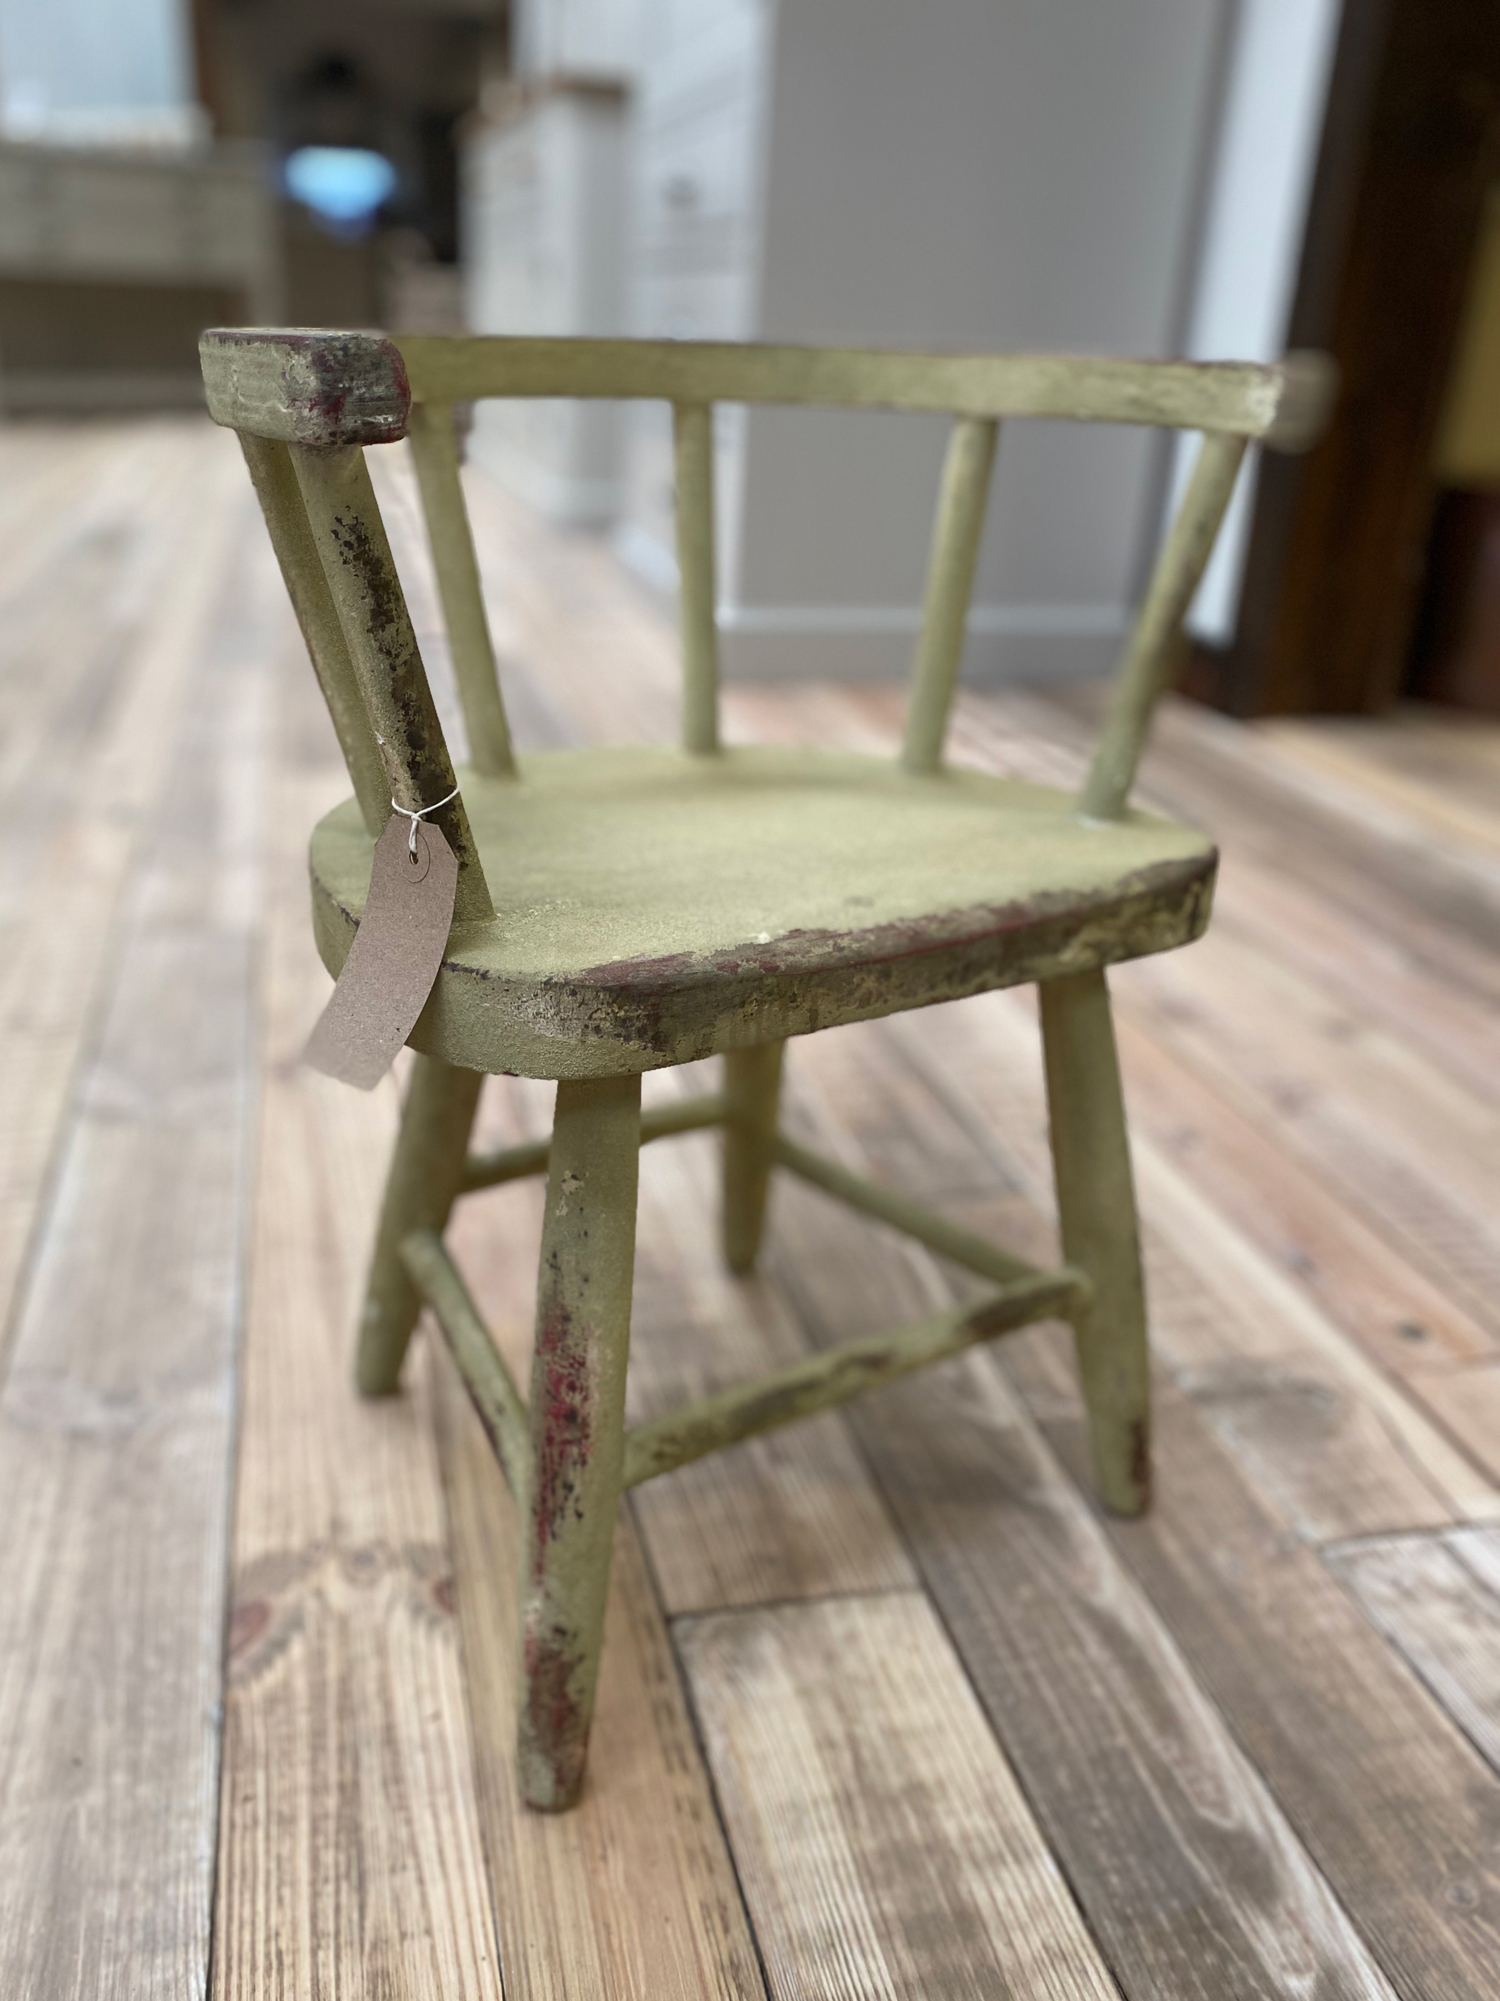 Rustic green crackled toddlers chair with curved back